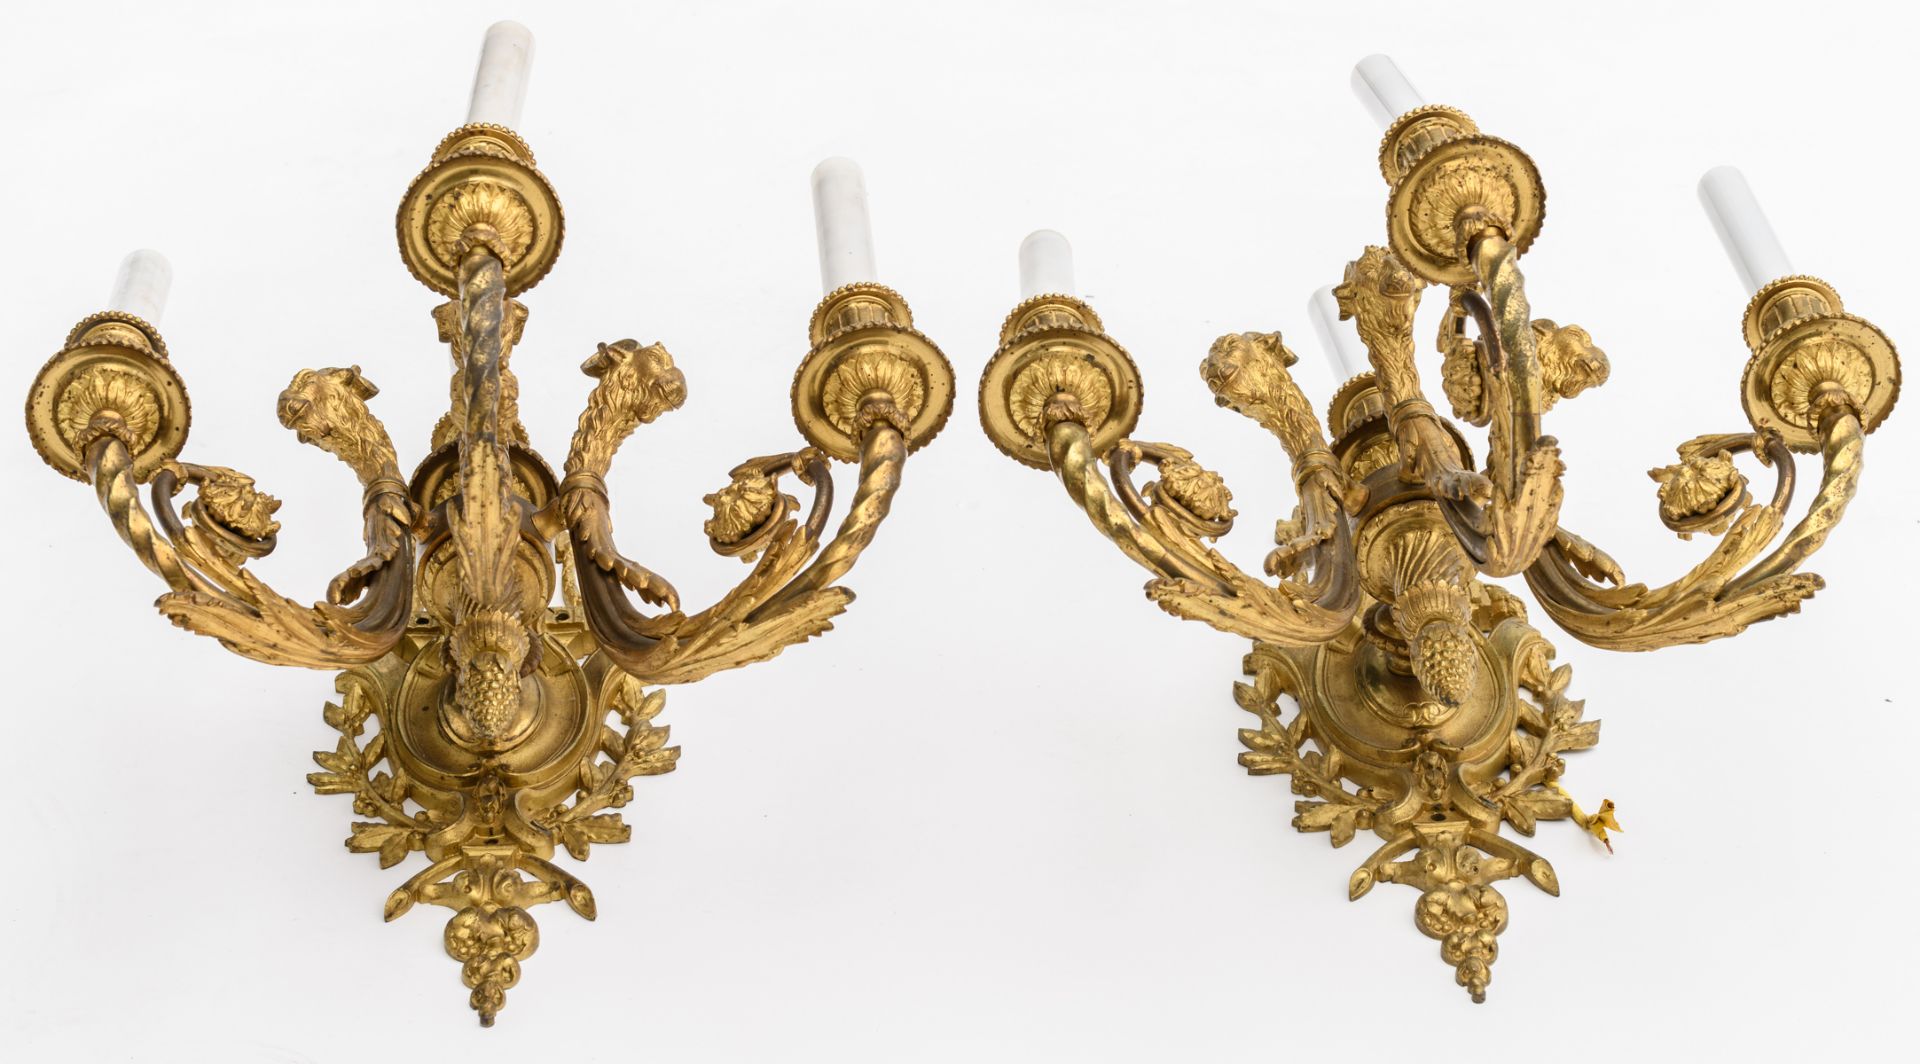 A nice pair of 19thC gilt bronze neoclassical wall sconces, the crest of the arms shaped as rams - Image 5 of 5